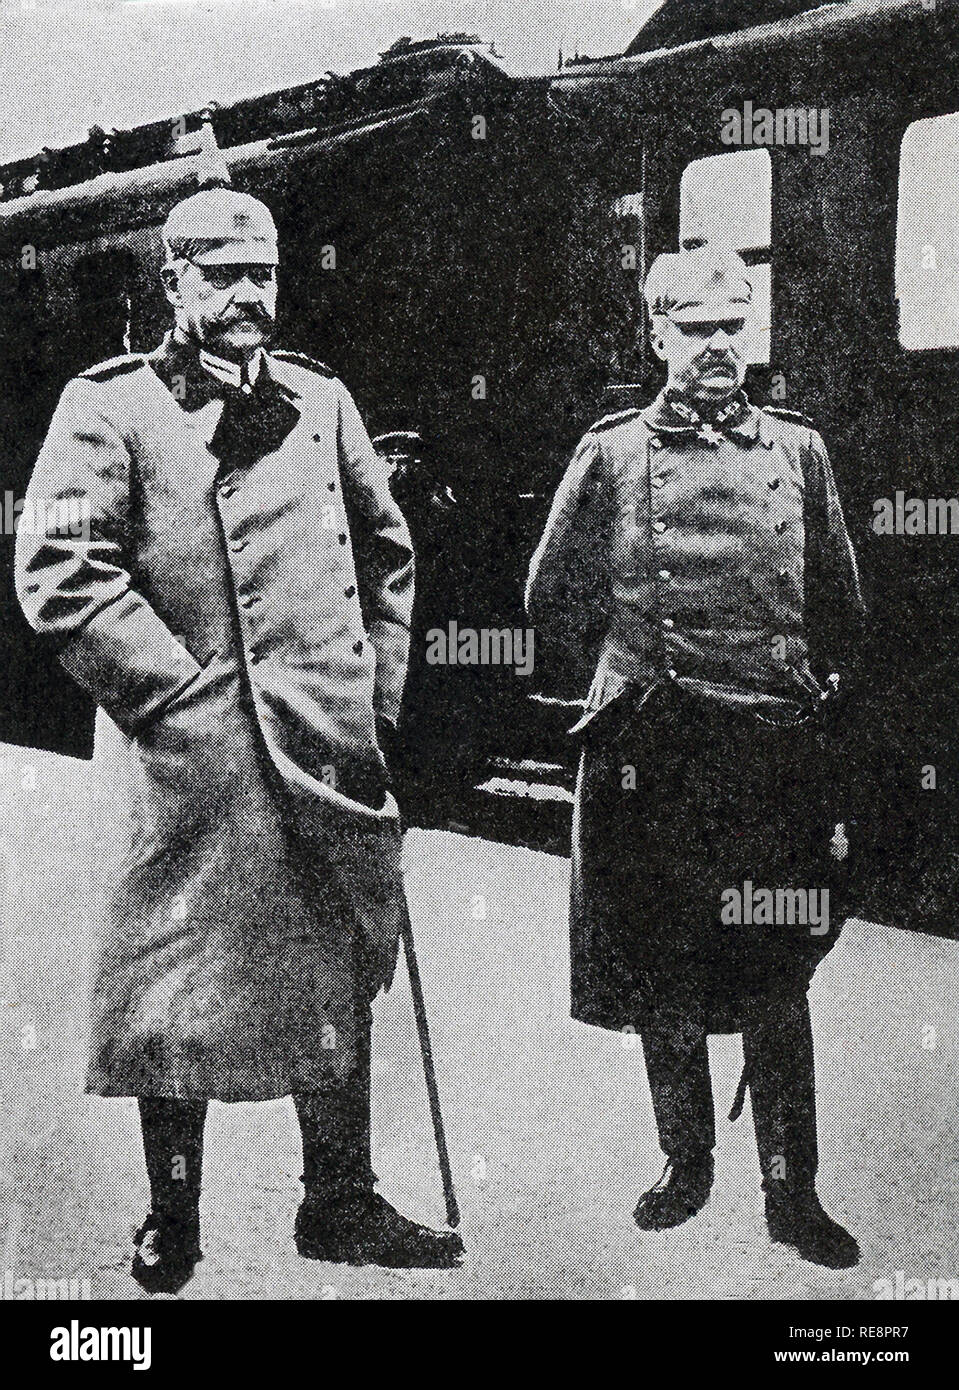 Pictured here in this photo that dates to World War I are Hindenburg and Ludendorff, the  commanders of the German Armies on the Western Front. Erich Ludendorff was a German general and was vitorious in the Battle of Liege and Battle of Tannenberg. He and Hindenberg led the war efforts of the First World War, but the failure of the Spring Offensive in 1918 led to his ousting later that year. Paul von Hindenburg commanded the German military during the second half of World War I and, in 1925, was elected President of the Weimar Republic. He appointed Adolf Hitler chancellor in 1933. The zeppeli Stock Photo